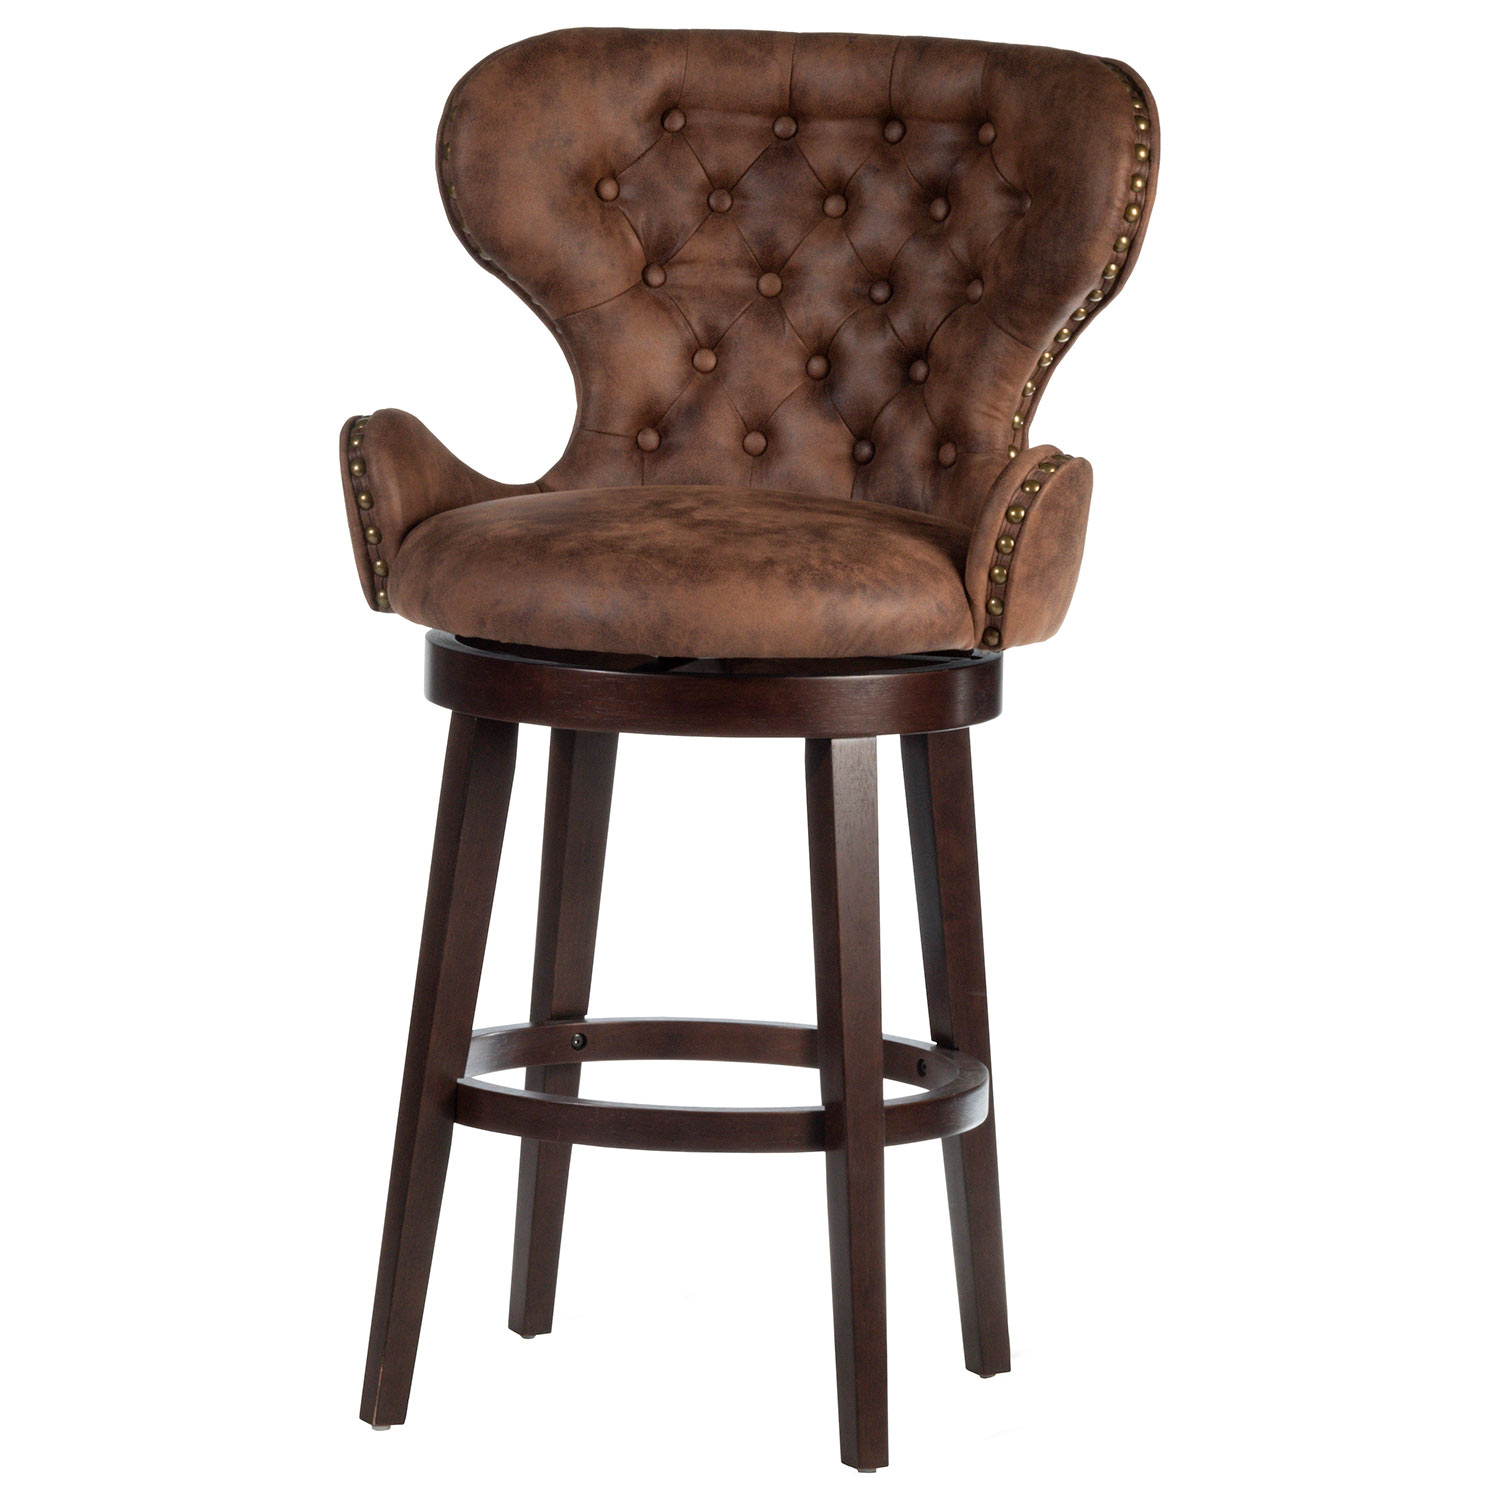 Hillsdale Mid-City Wood and Upholstered Swivel Counter Height Stool - Chocolate